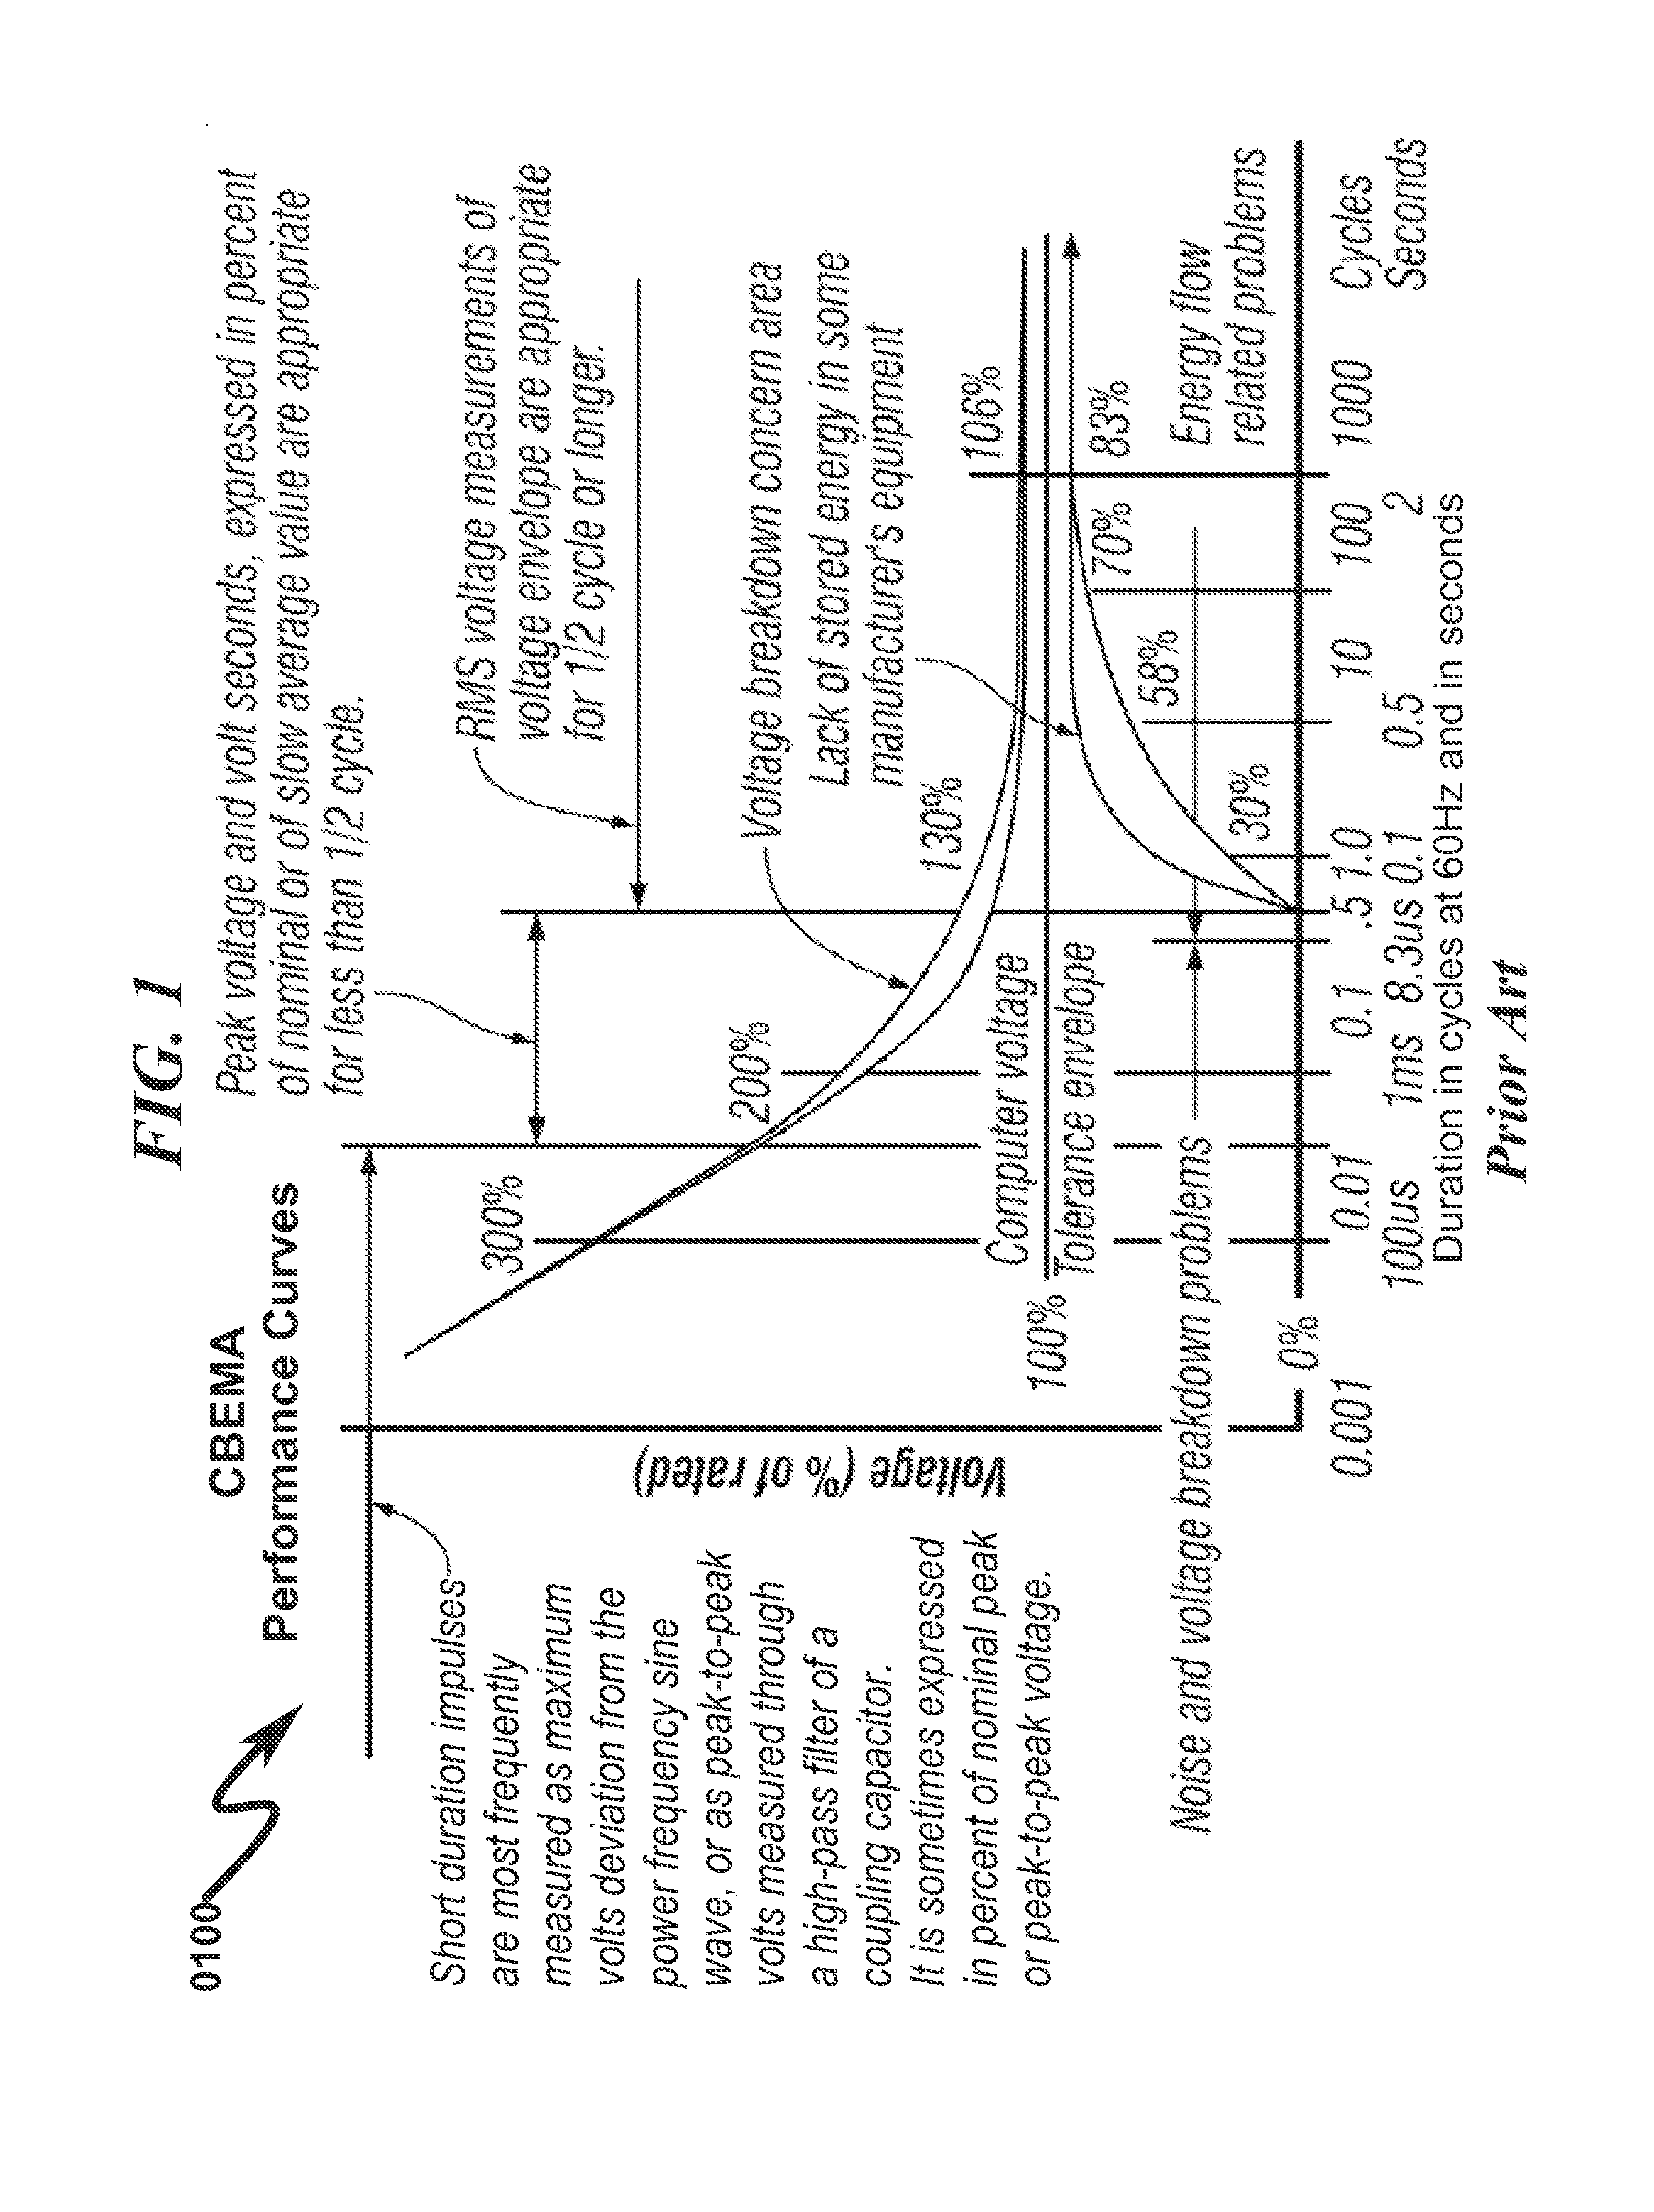 Uninterruptable power supply system and method